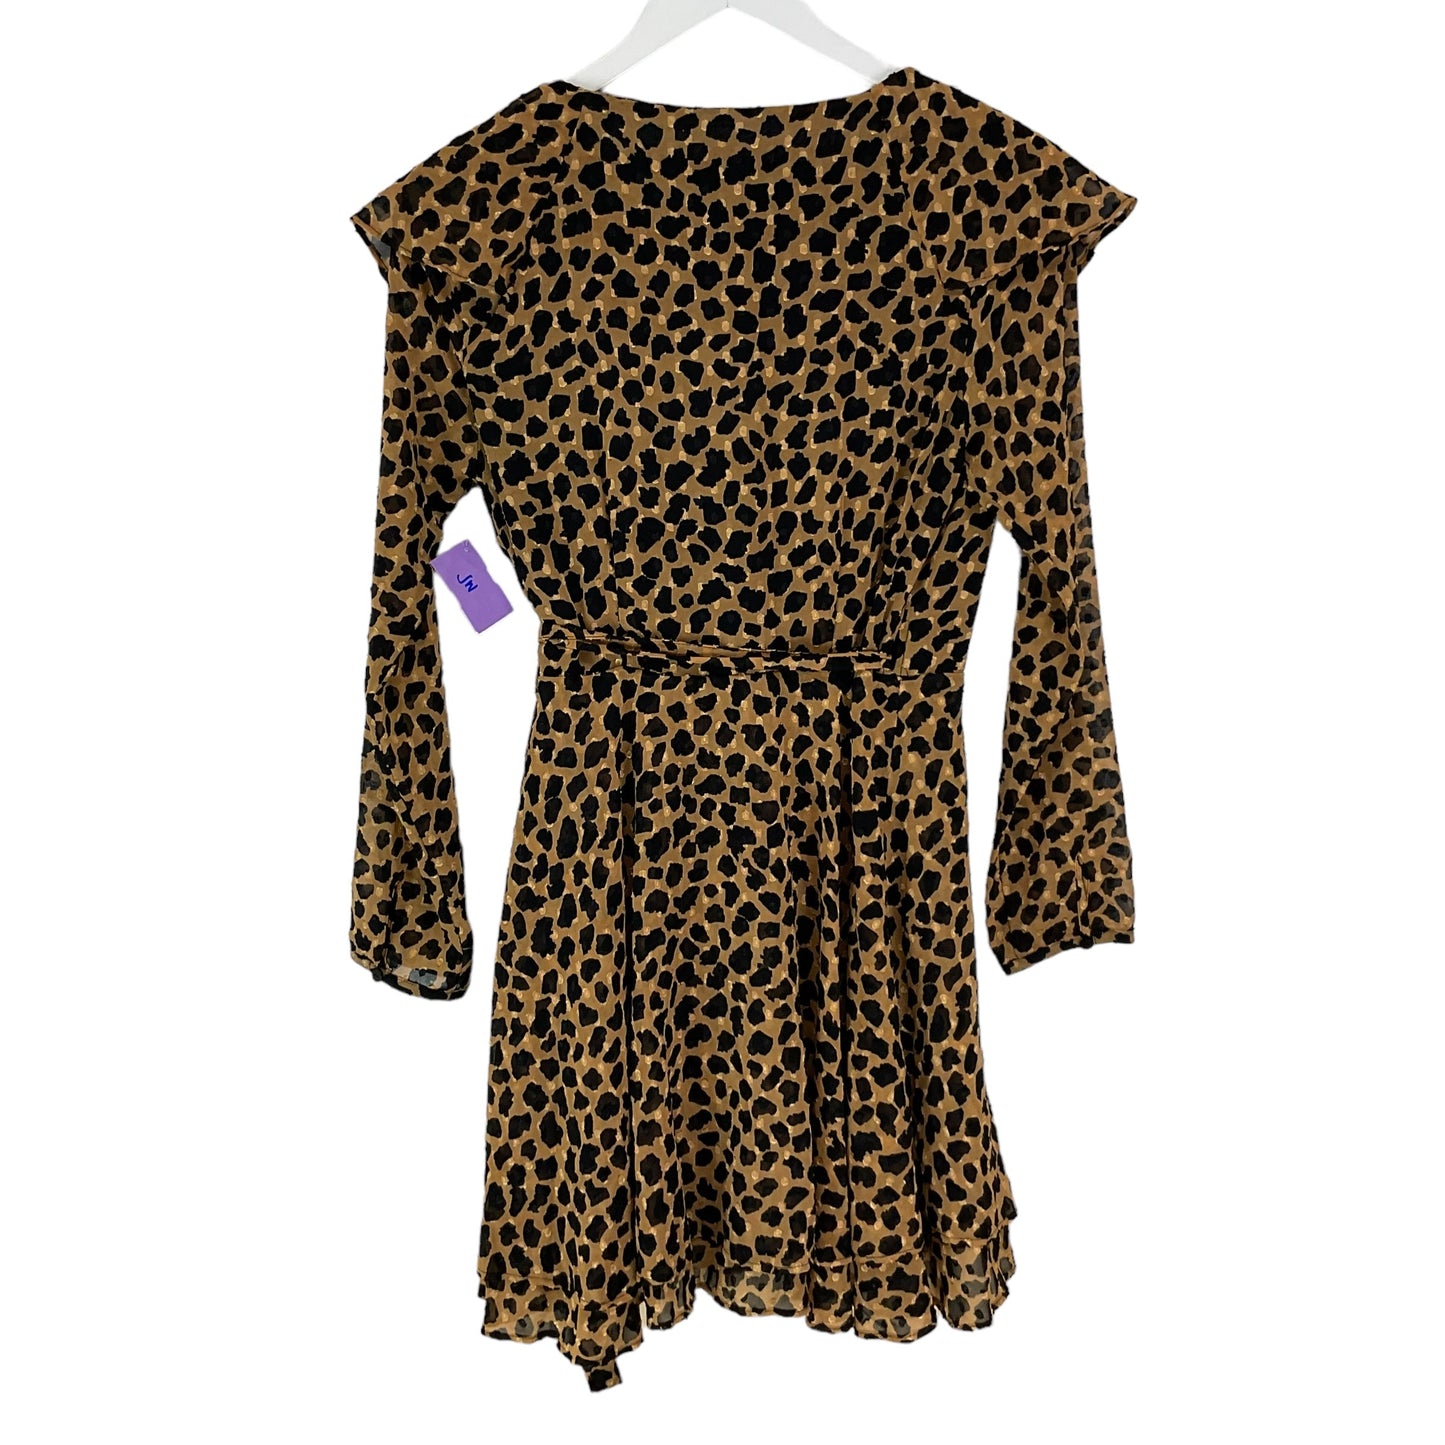 Animal Print Dress Casual Short Free People, Size S